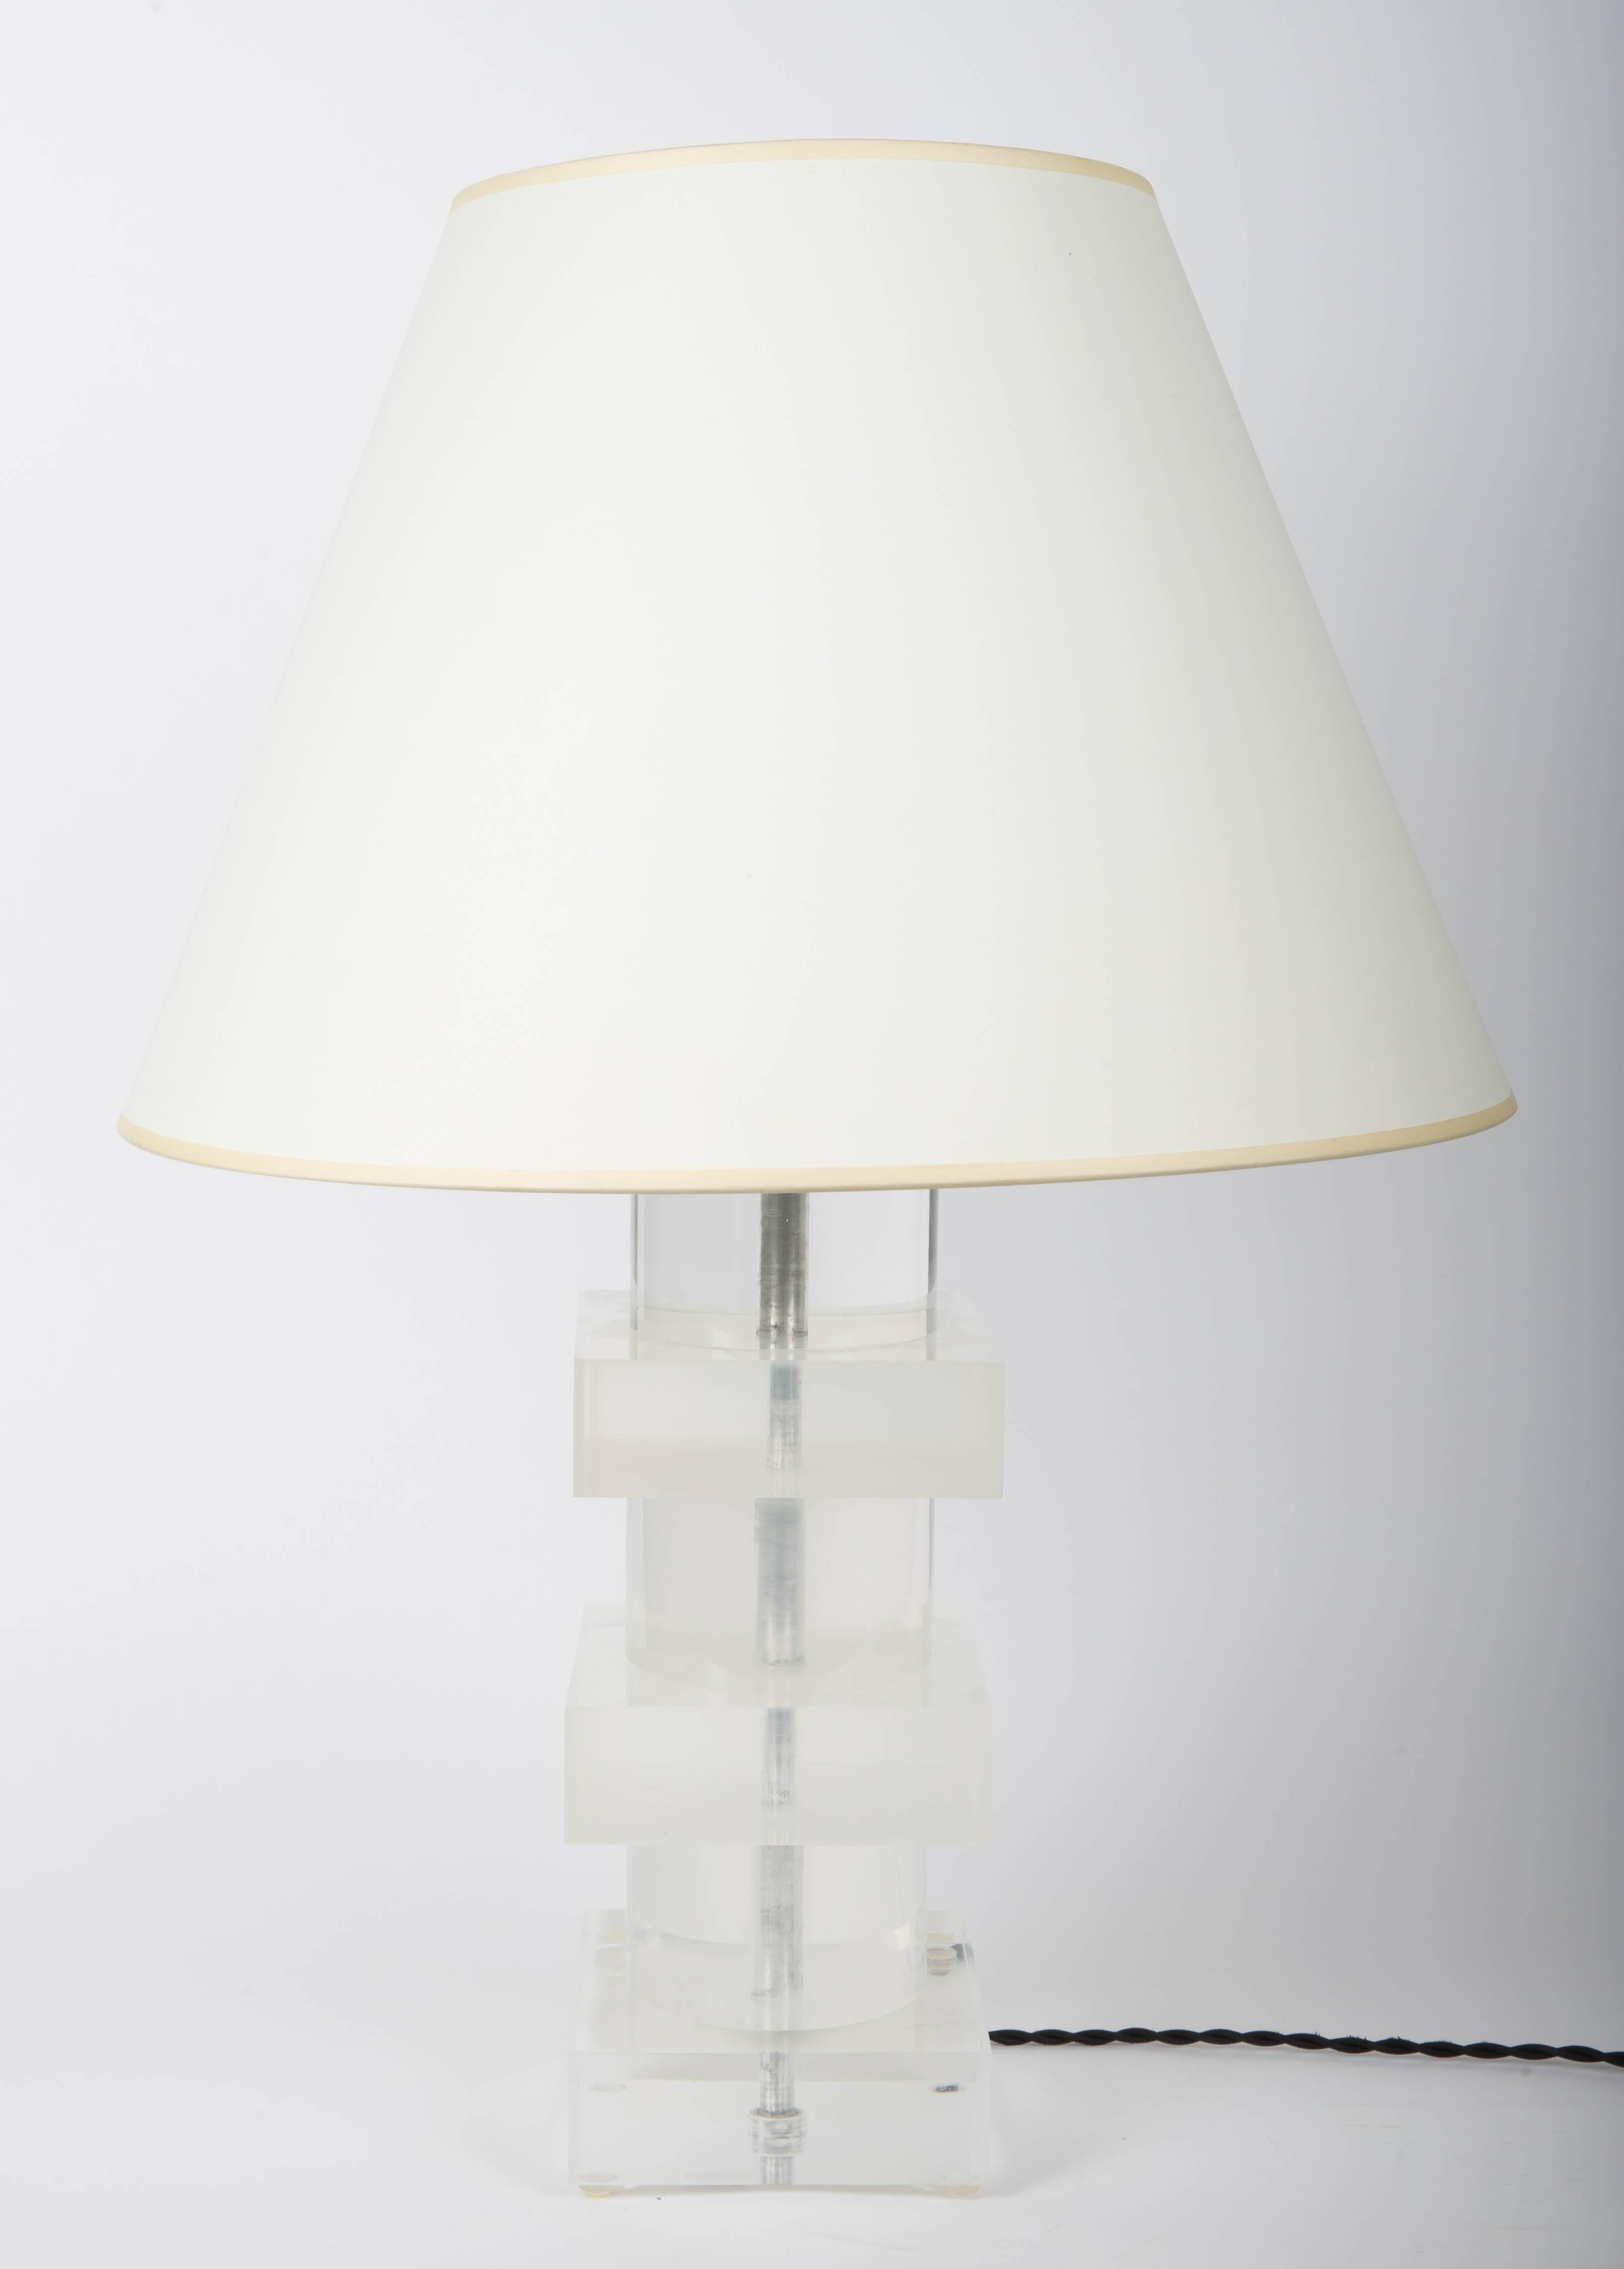 Lucite lamp with circular and square stacked layers.